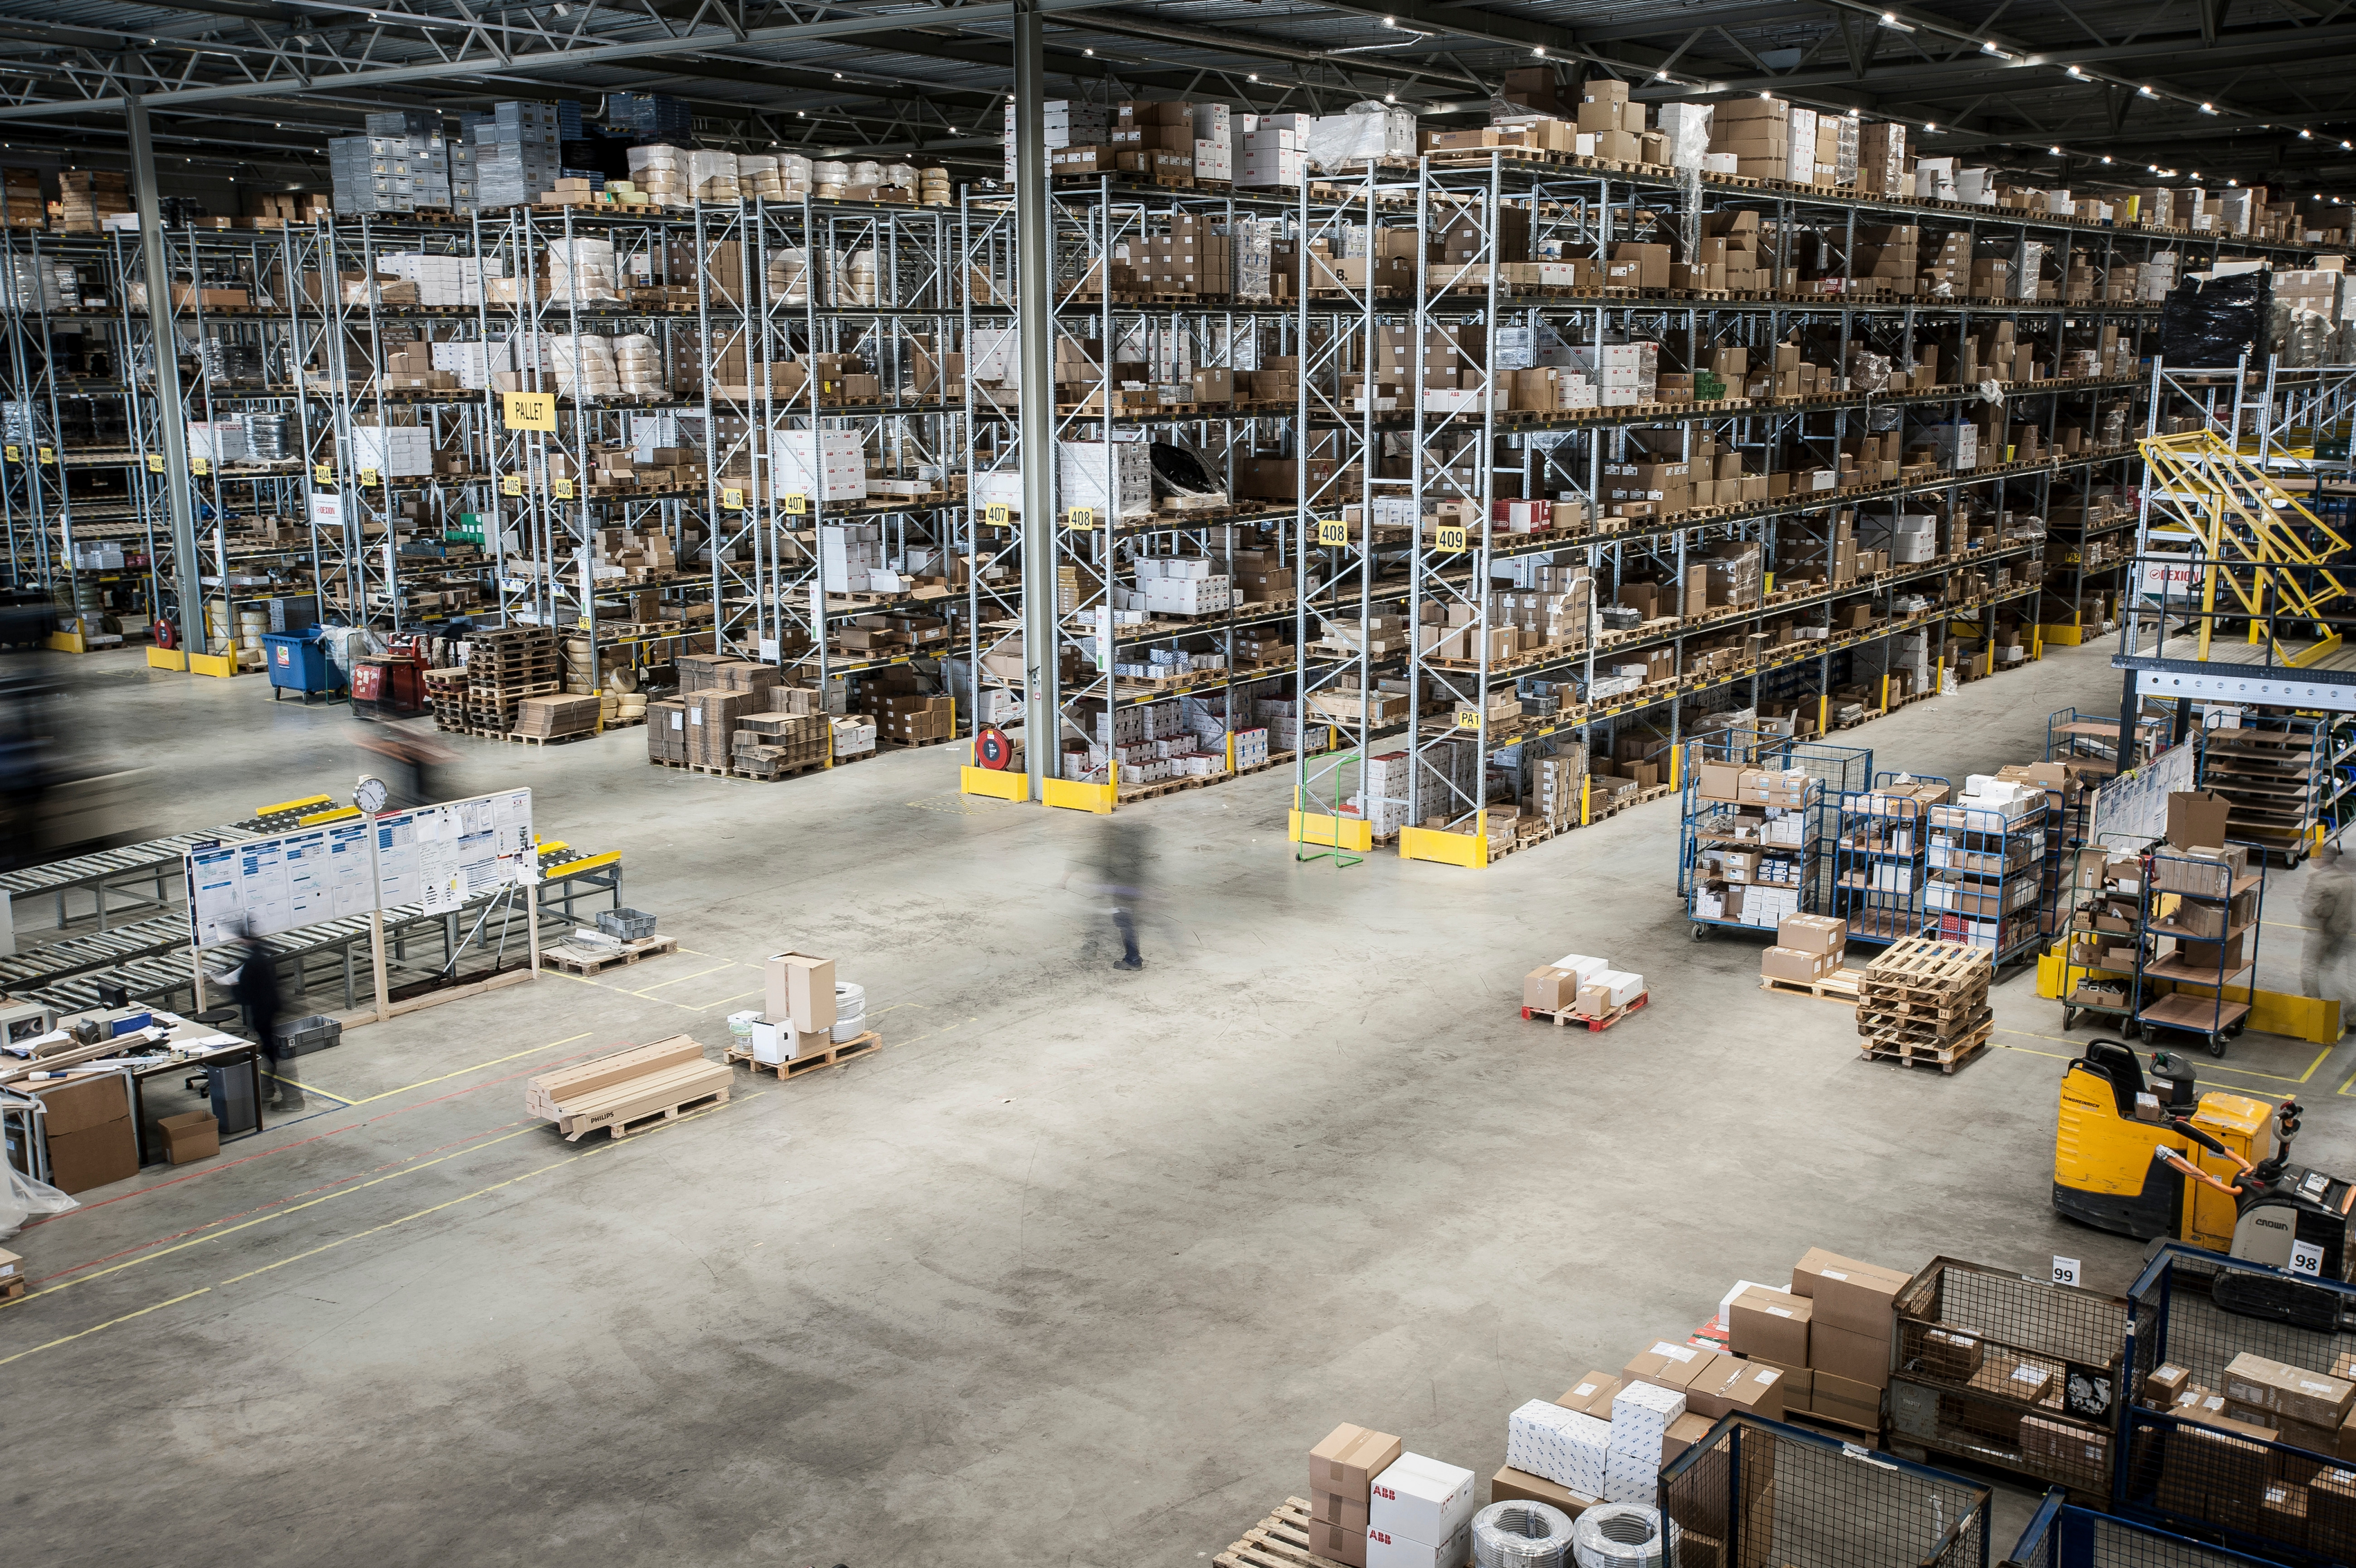 Robot stores: the automation of warehouses